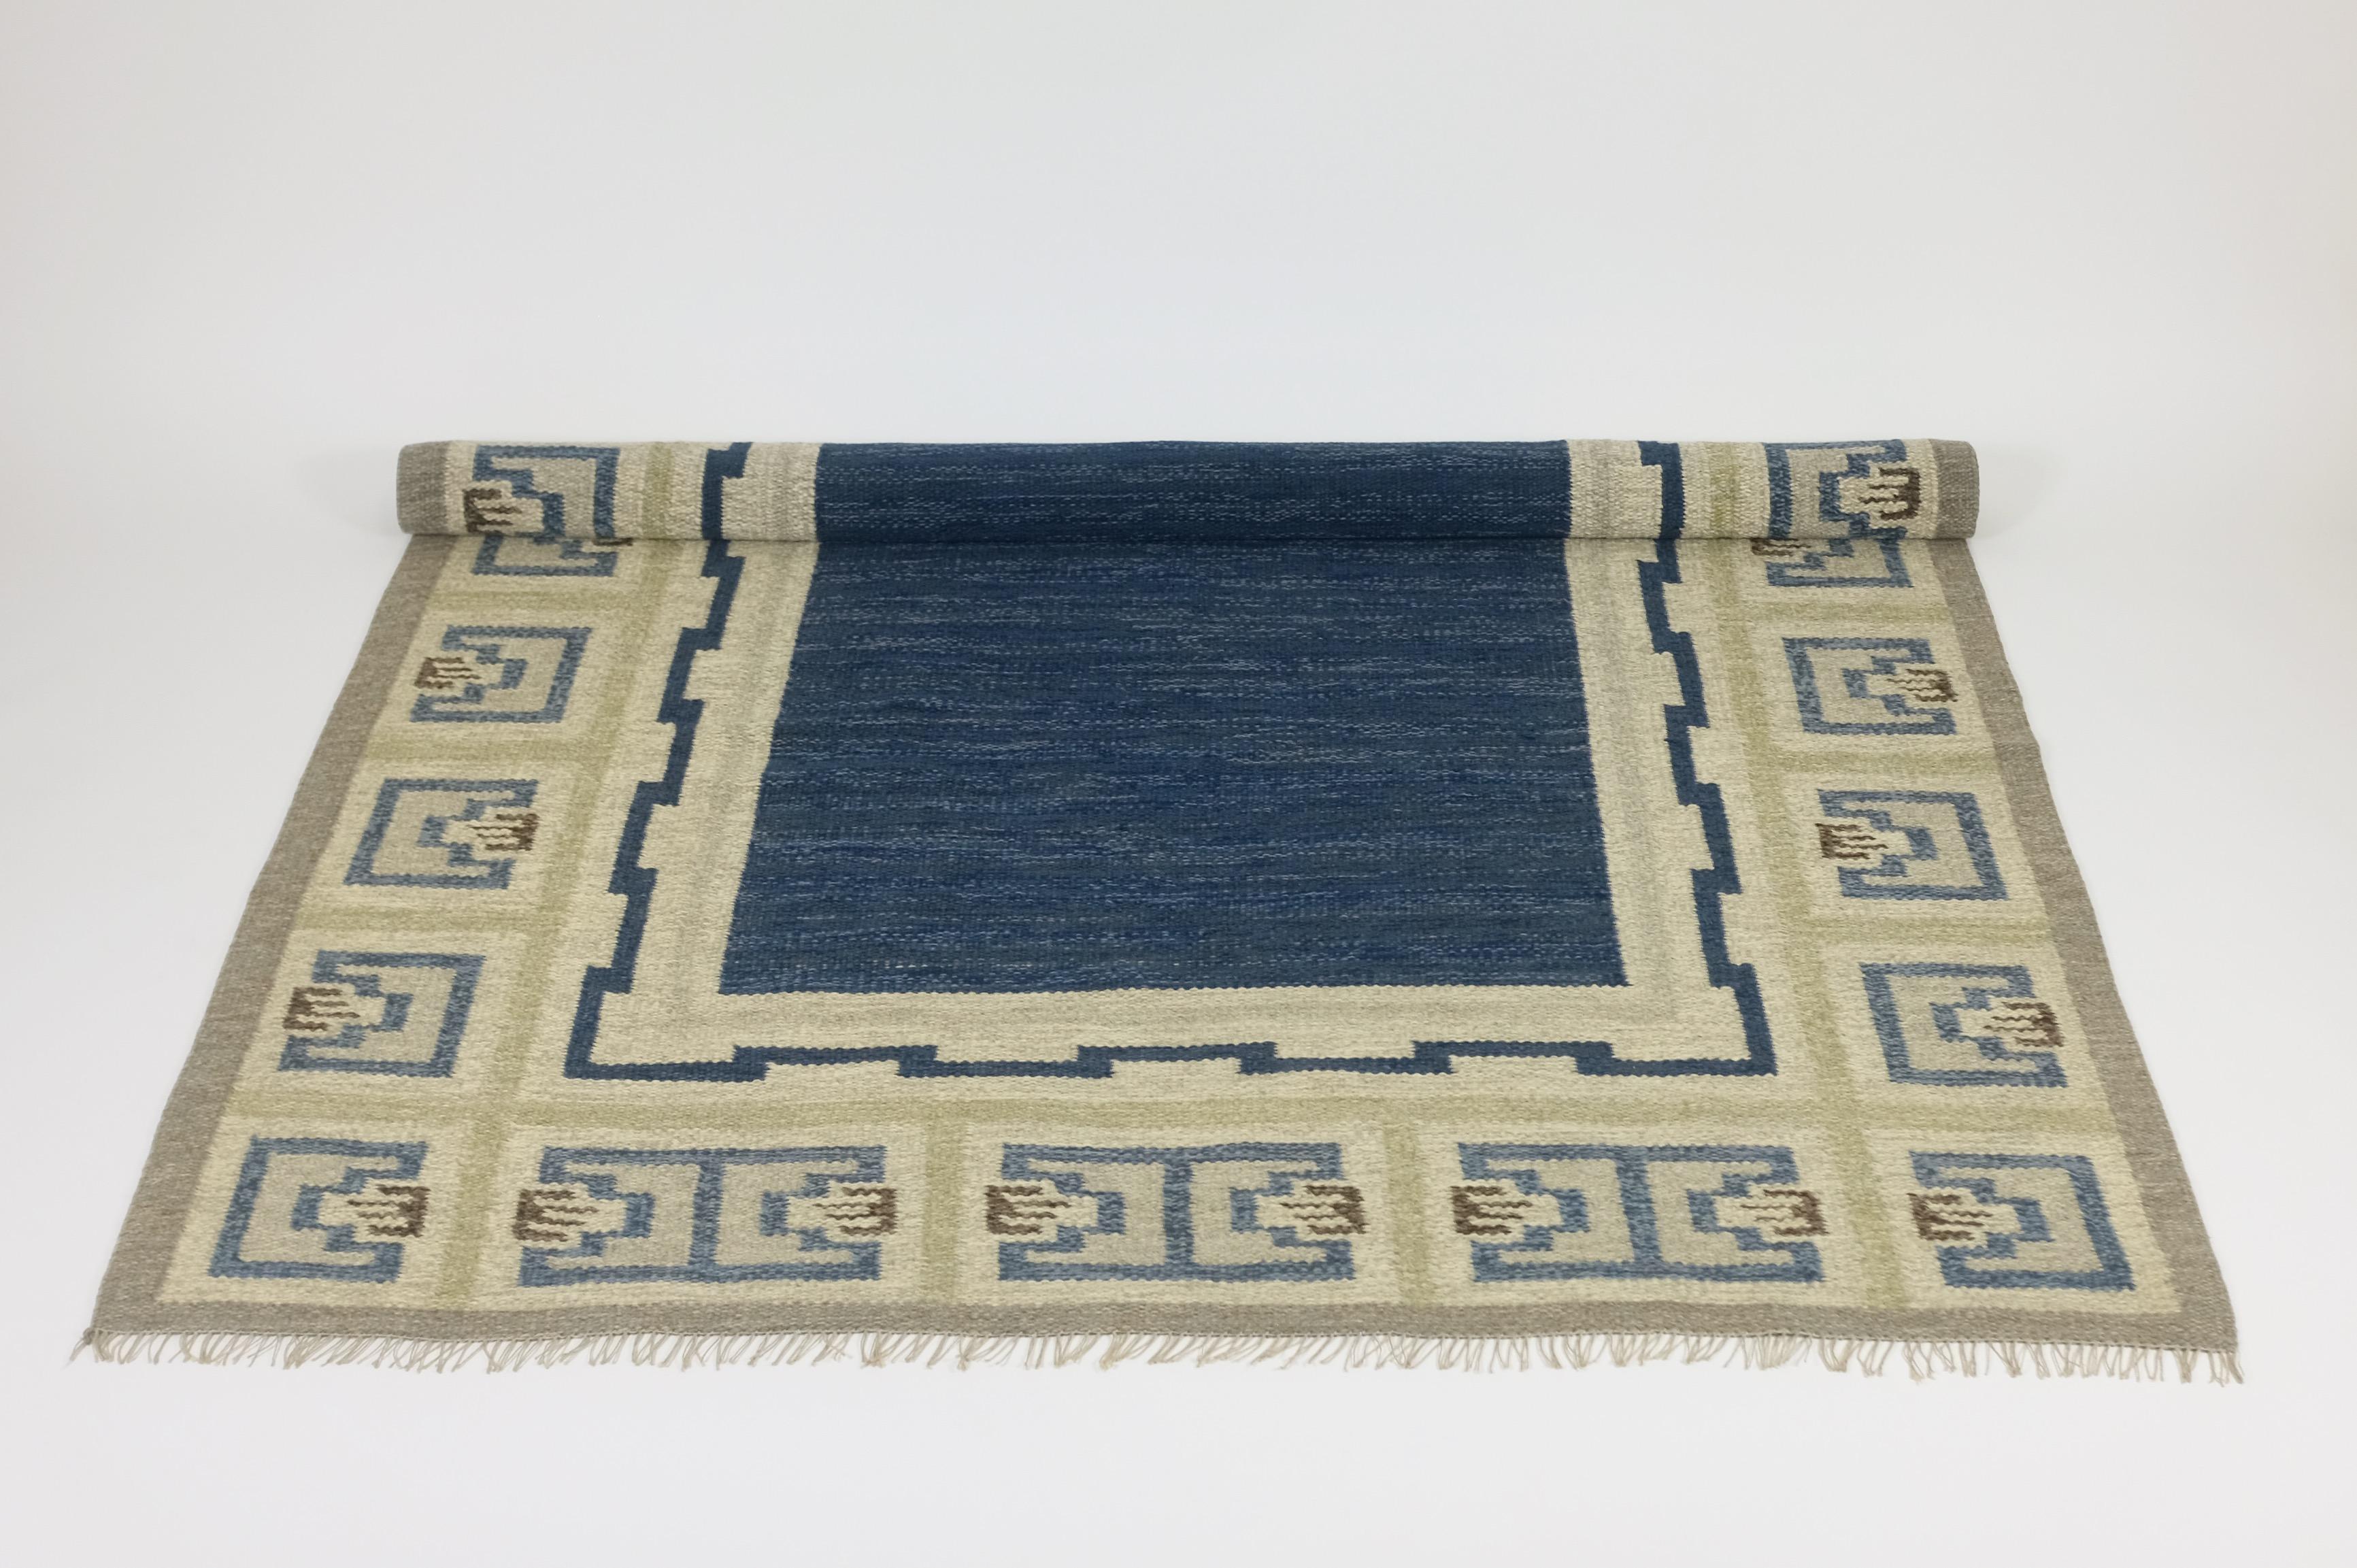 Rare 1940's Swedish rug by Aina Kånge. Beautiful blue, green and brown colored pattern in a greek revival style against a sand colored bottom. In a very good vintage condition with restored fringes and professionally cleaned. 

Country: